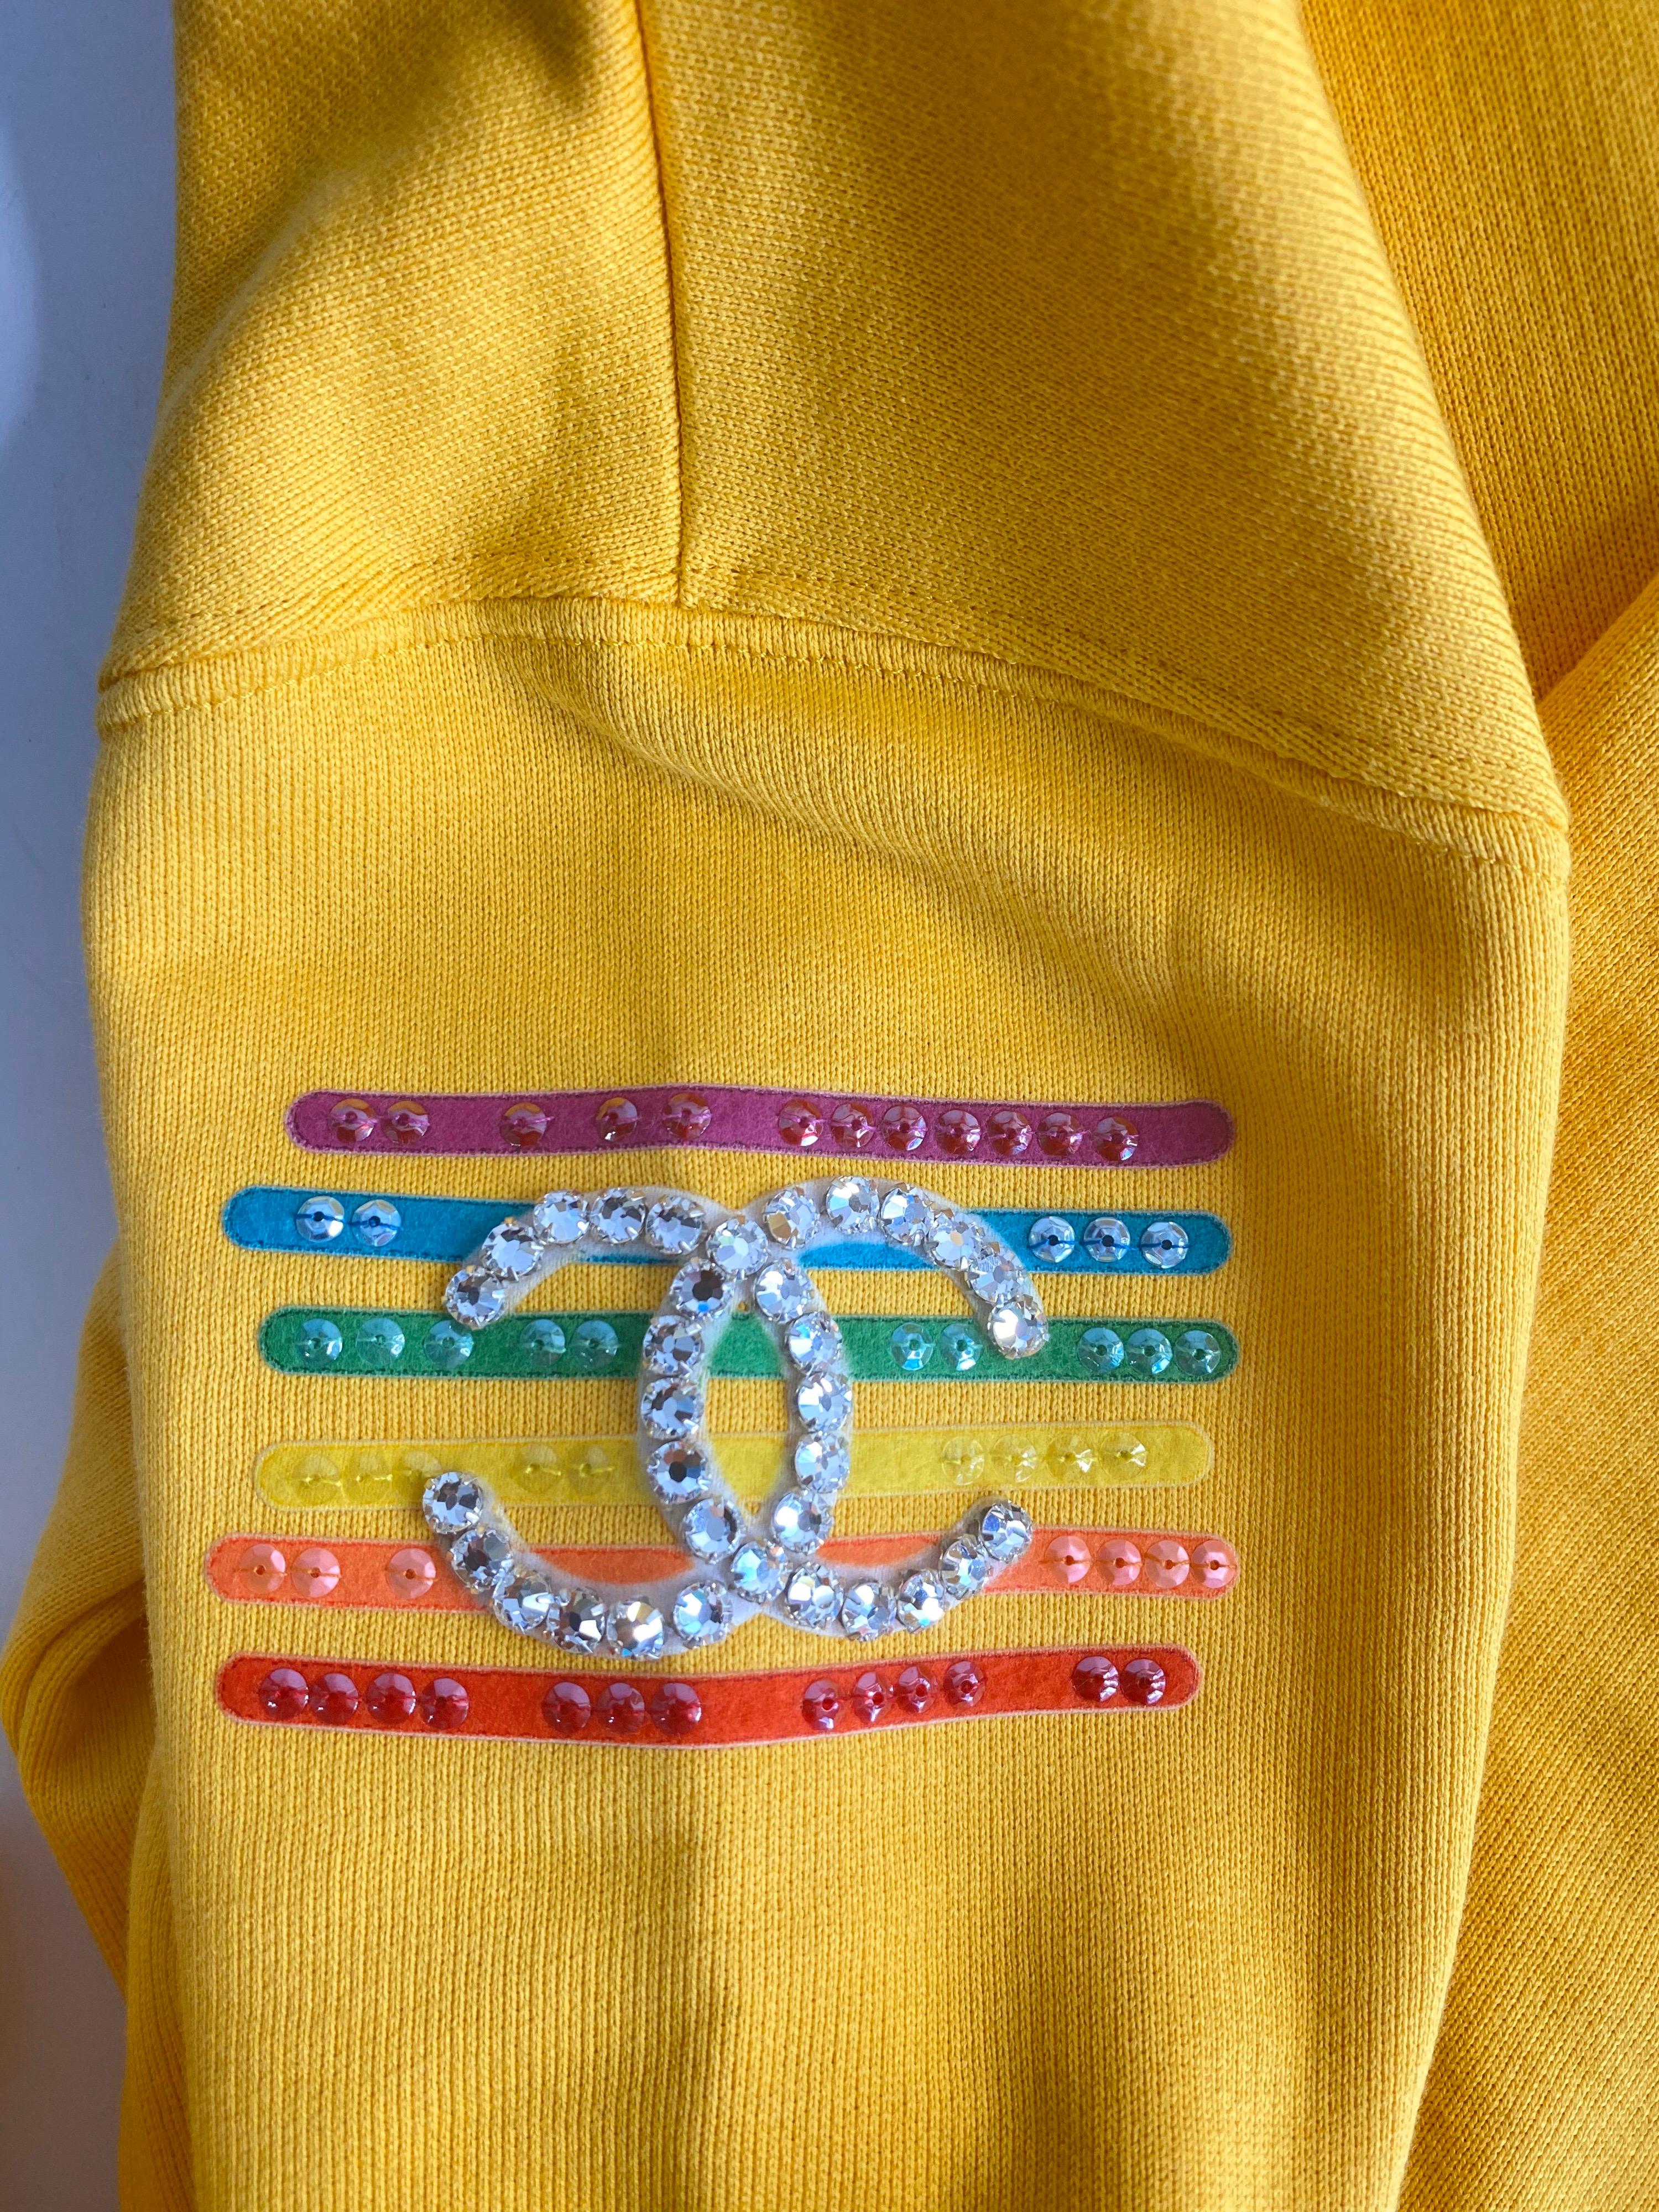 Chanel x Pharrell 2019 Chanel Appliqué Sunflower Yellow Hoodie  For Sale 3